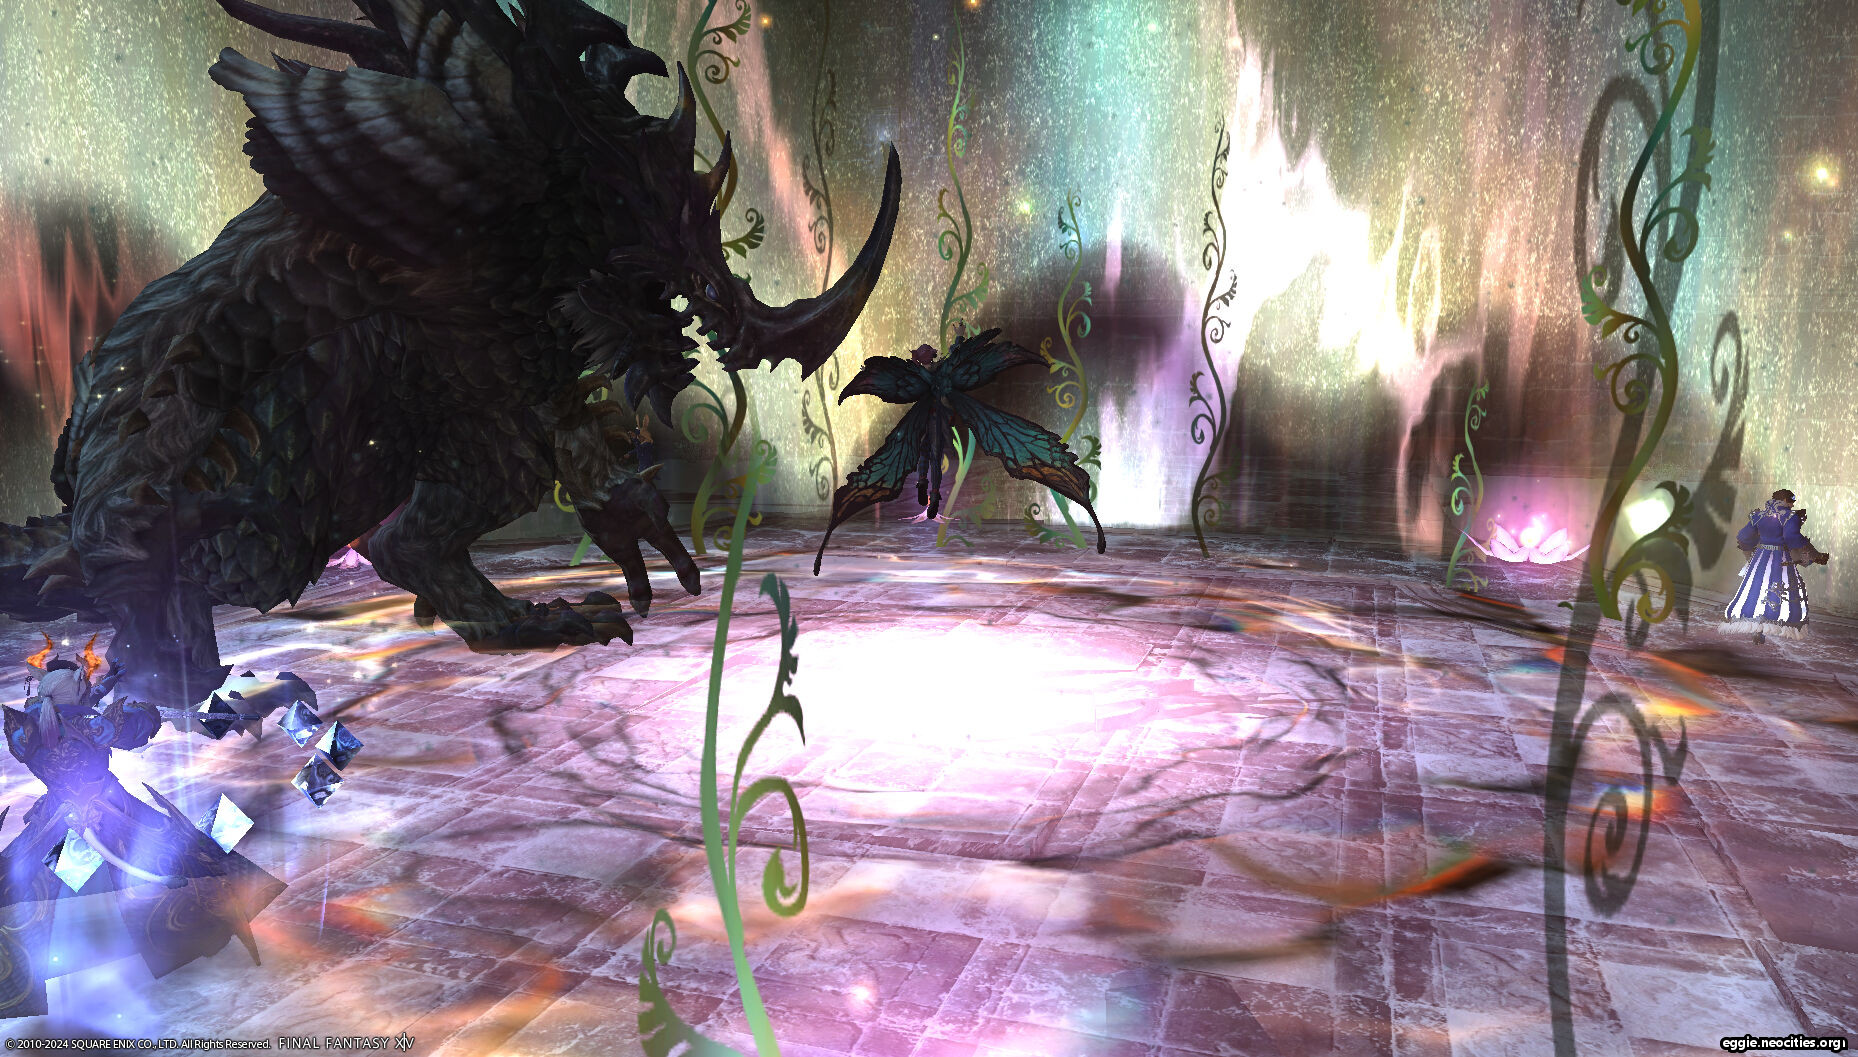 Giruveganaus fight from Stone Vigil Hard. Zel is using the spell Being Mortal which gives big pixie wings